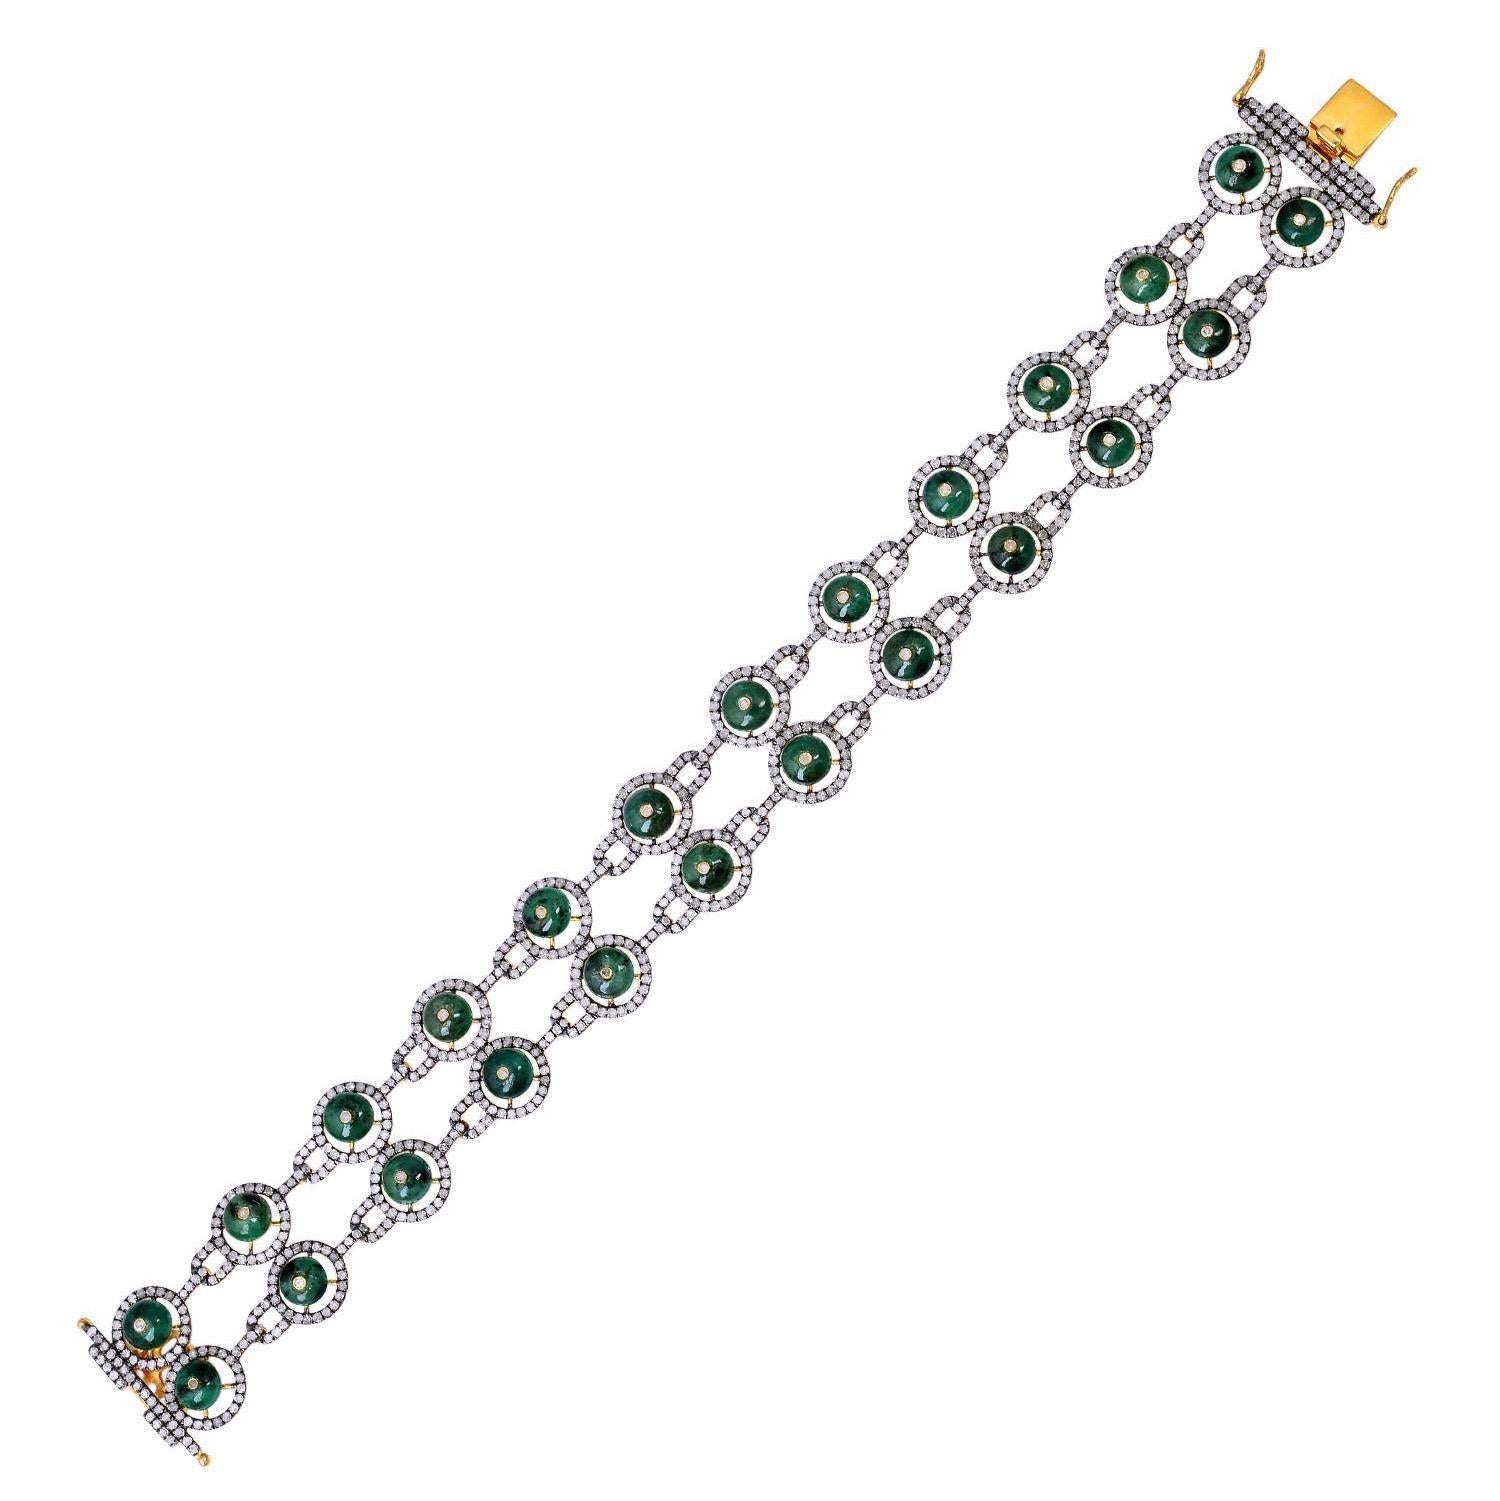 A stunning bracelet handmade in 18K gold and sterling silver.  It is set in 15.7 carats emerald and 4.15 carats of sparkling diamonds.  Total length 7 inches. Clasp Closure.
Instock

FOLLOW  MEGHNA JEWELS storefront to view the latest collection &